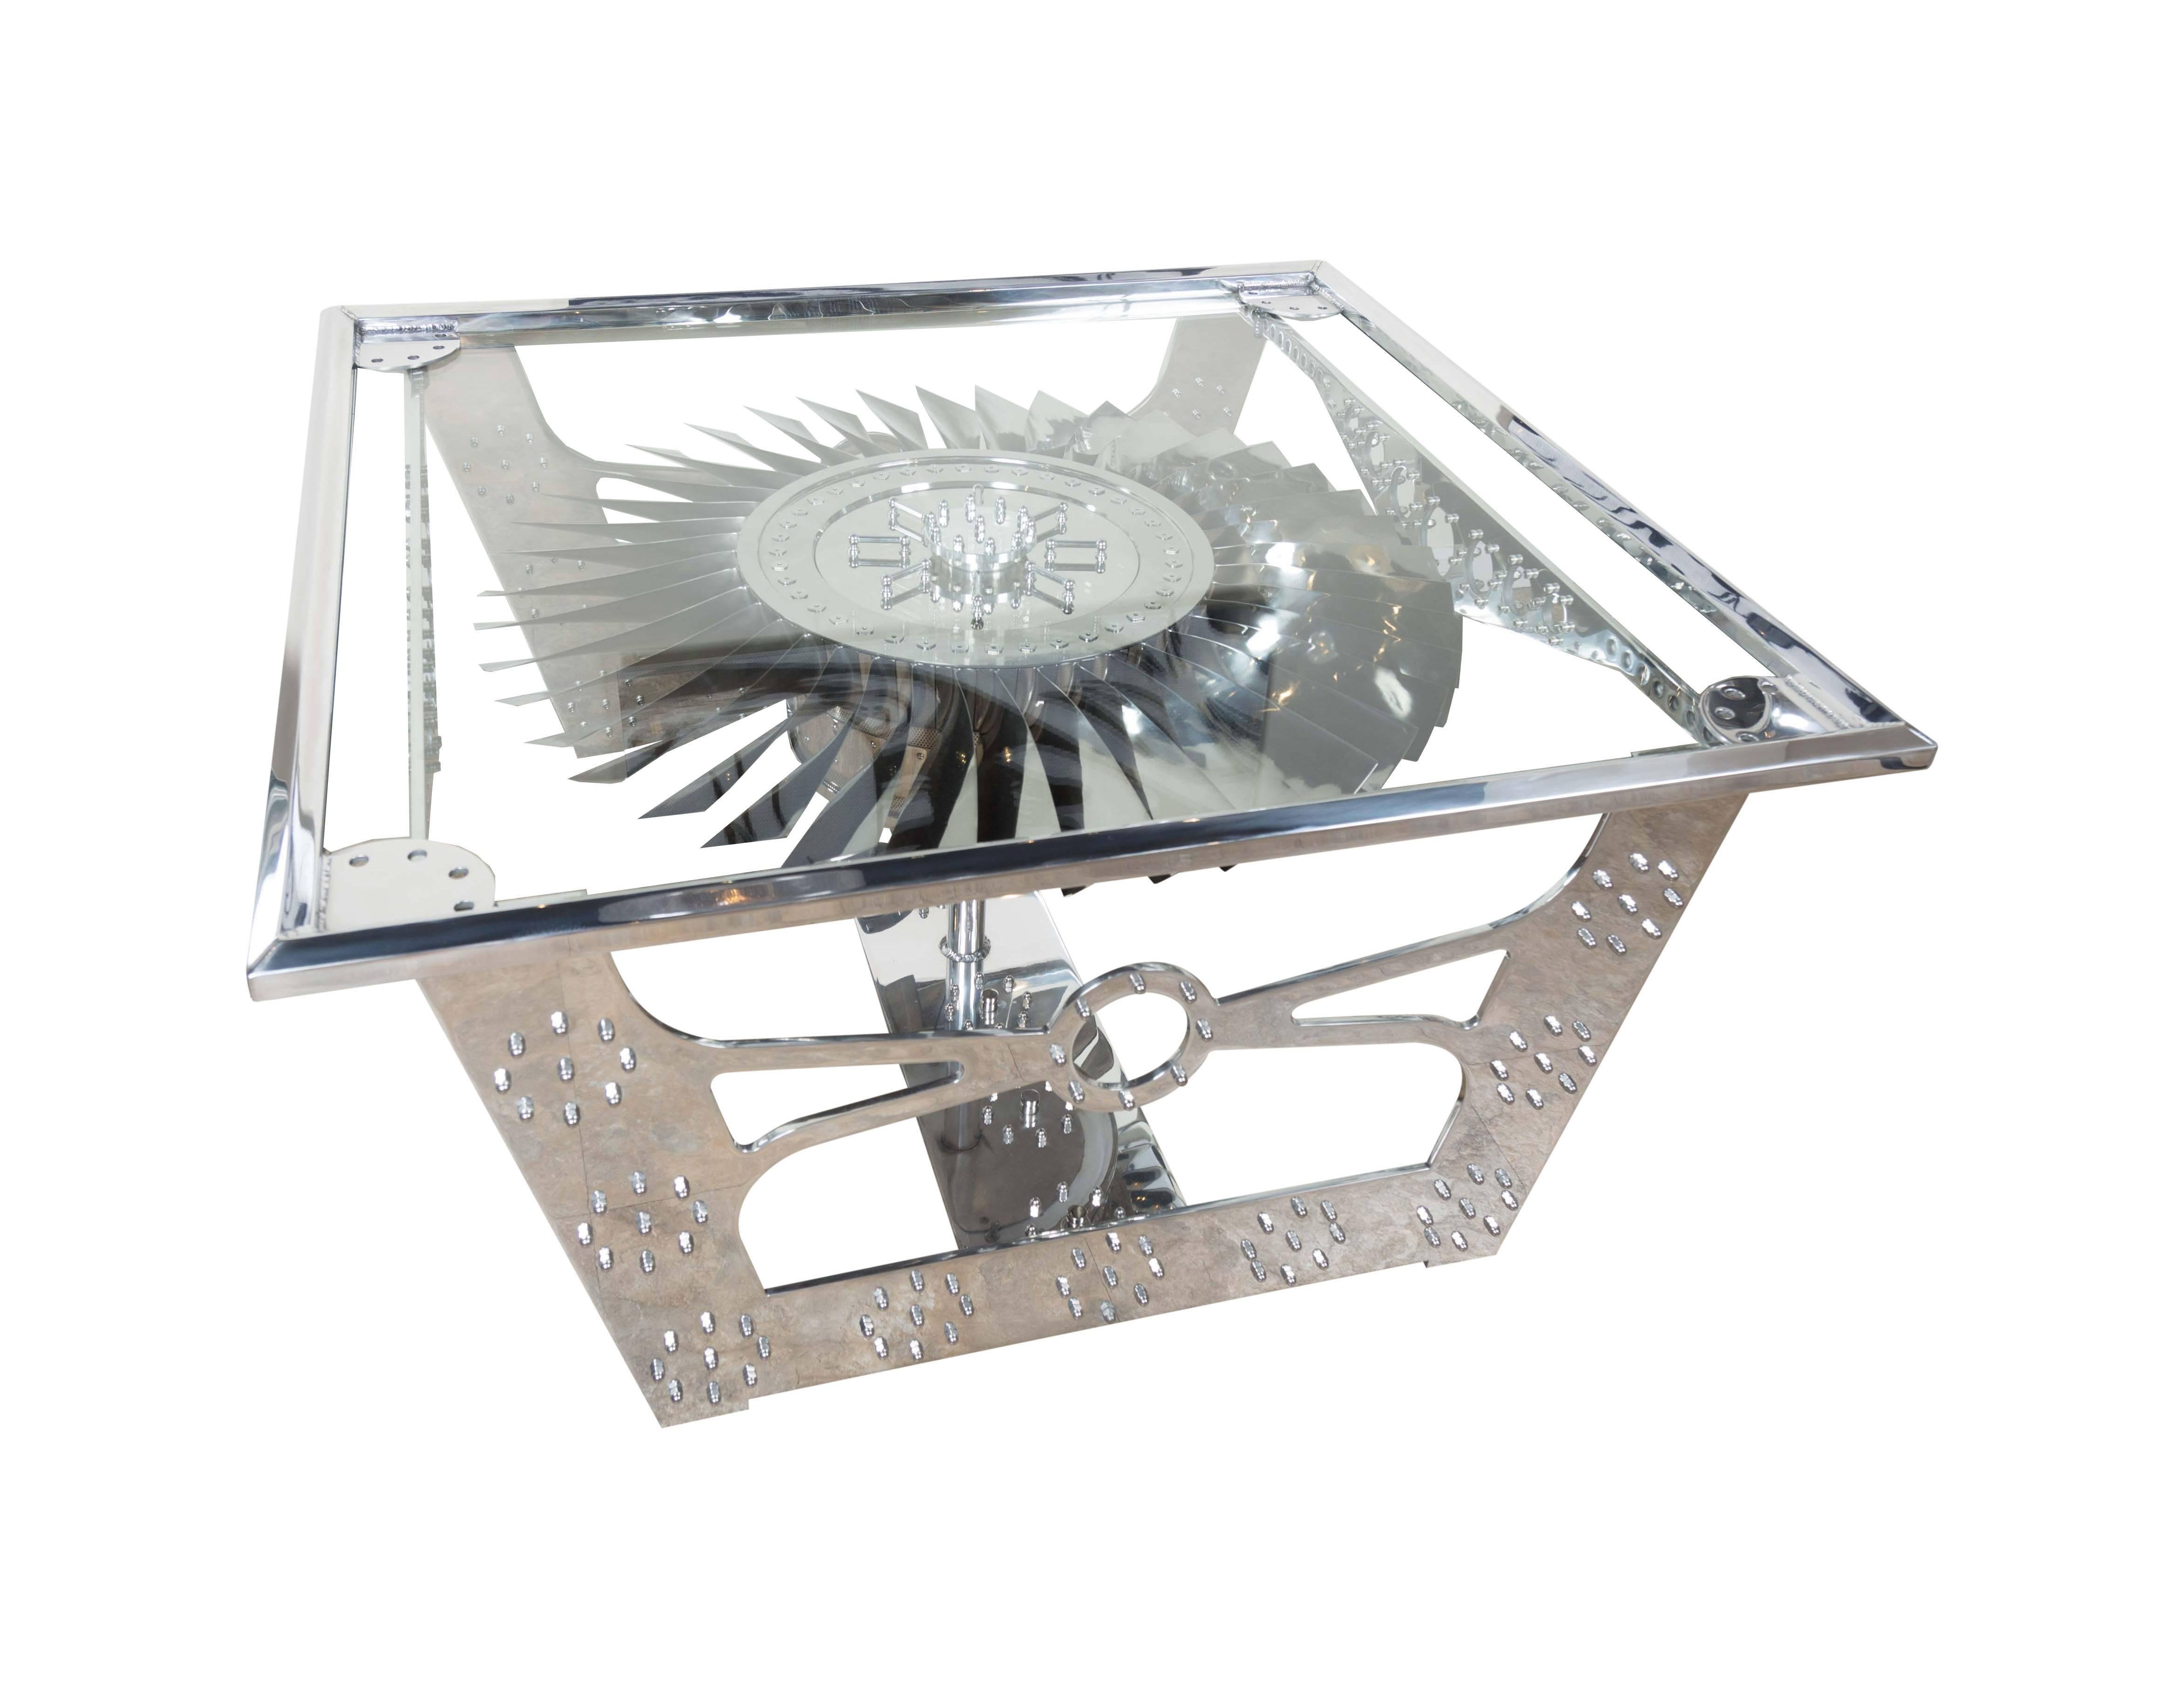 This custom motorized JT8D turbine table by Daniels Antiques draws those who pass by! There are many elements that make this more than just a table, it is a true piece of art. The main feature of the table is comprised of a motorized and hand